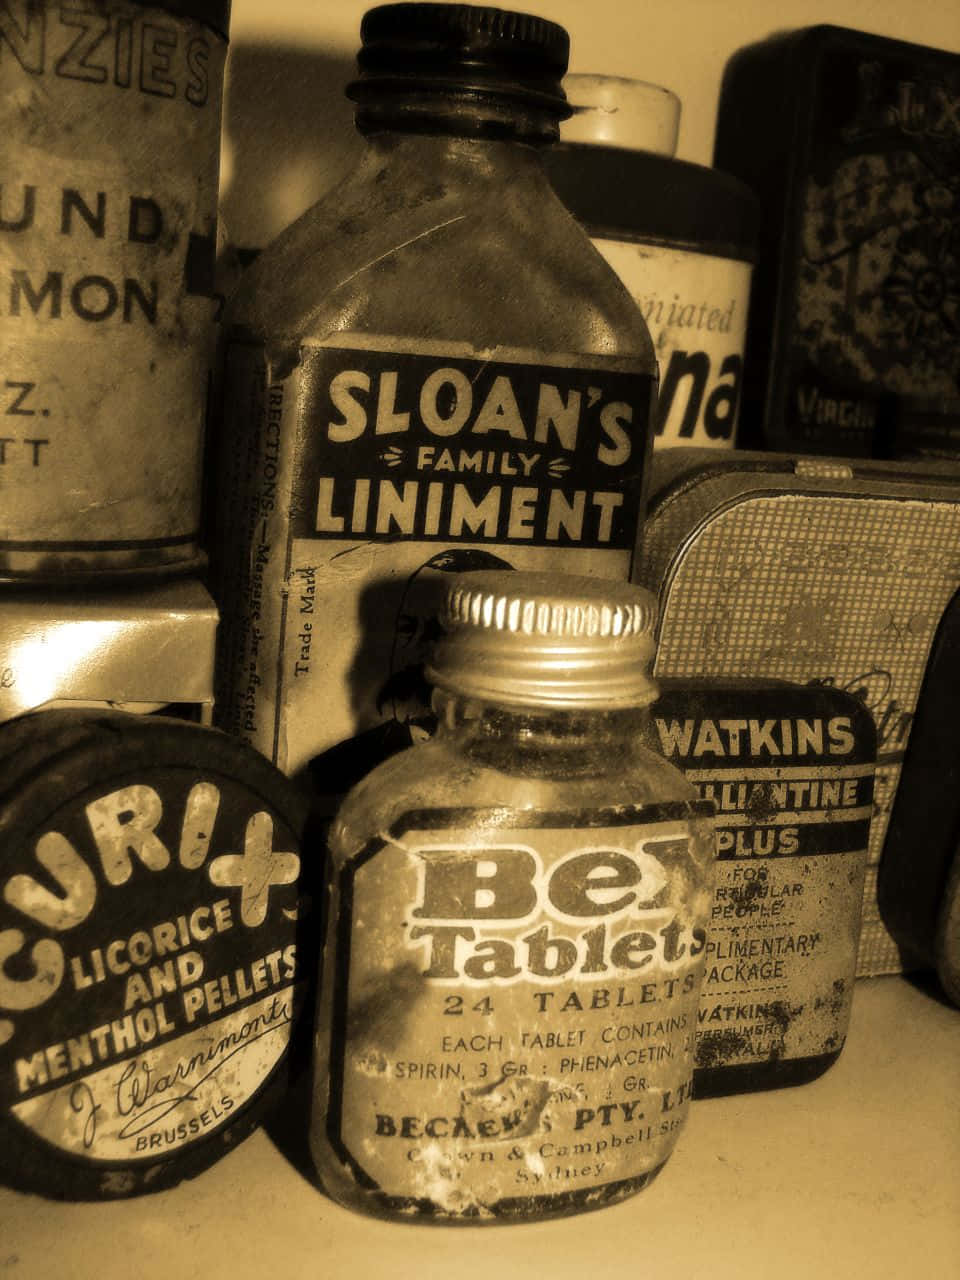 A Collection Of Old Bottles And Jars On A Shelf